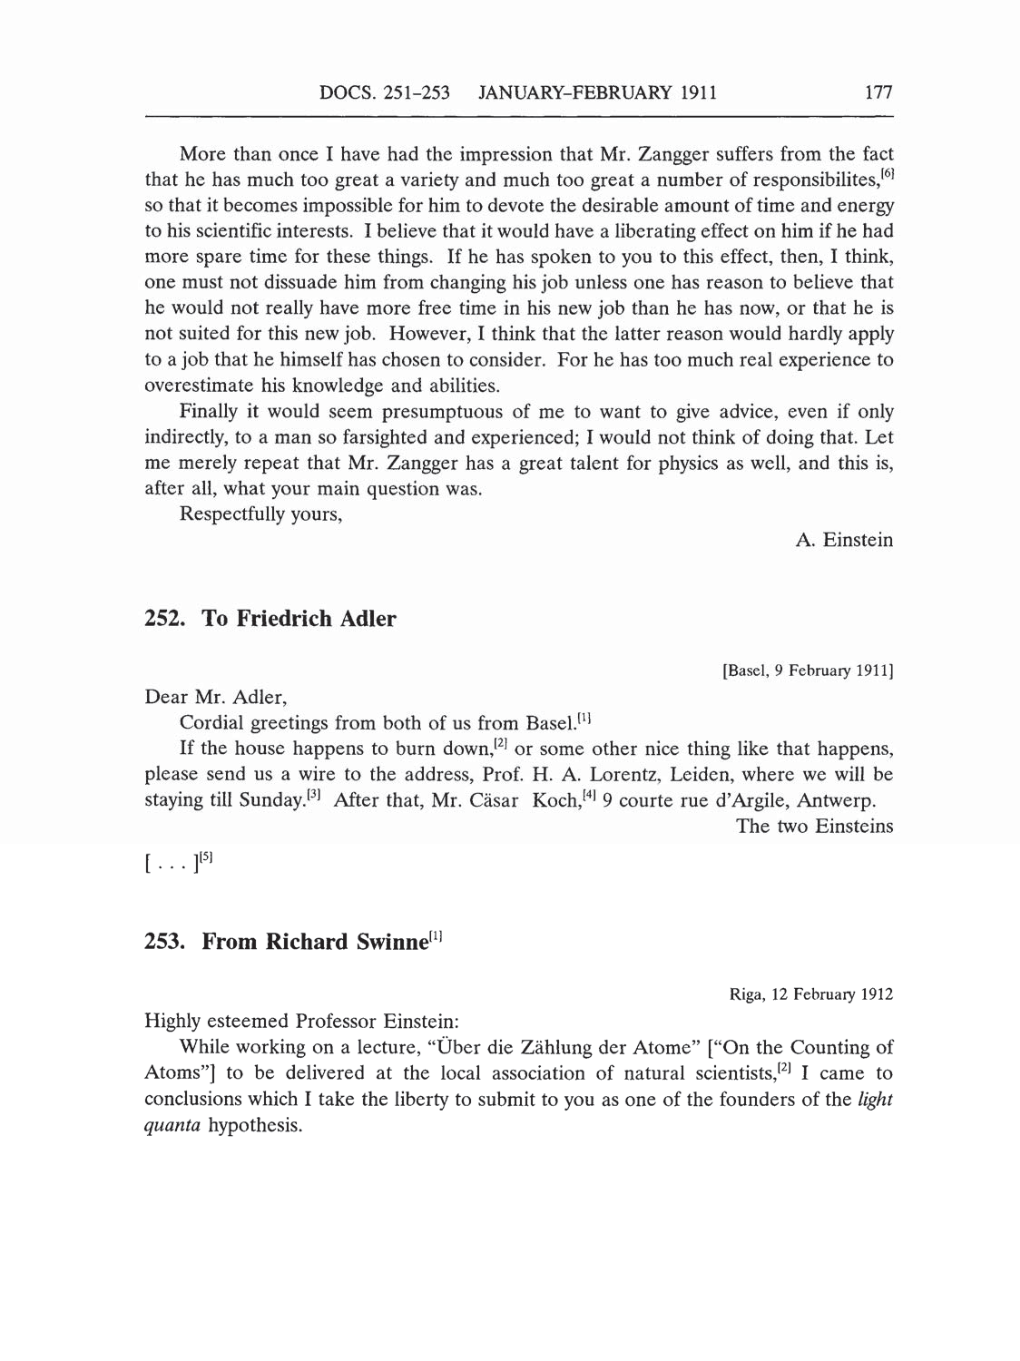 Volume 5: The Swiss Years: Correspondence, 1902-1914 (English translation supplement) page 177